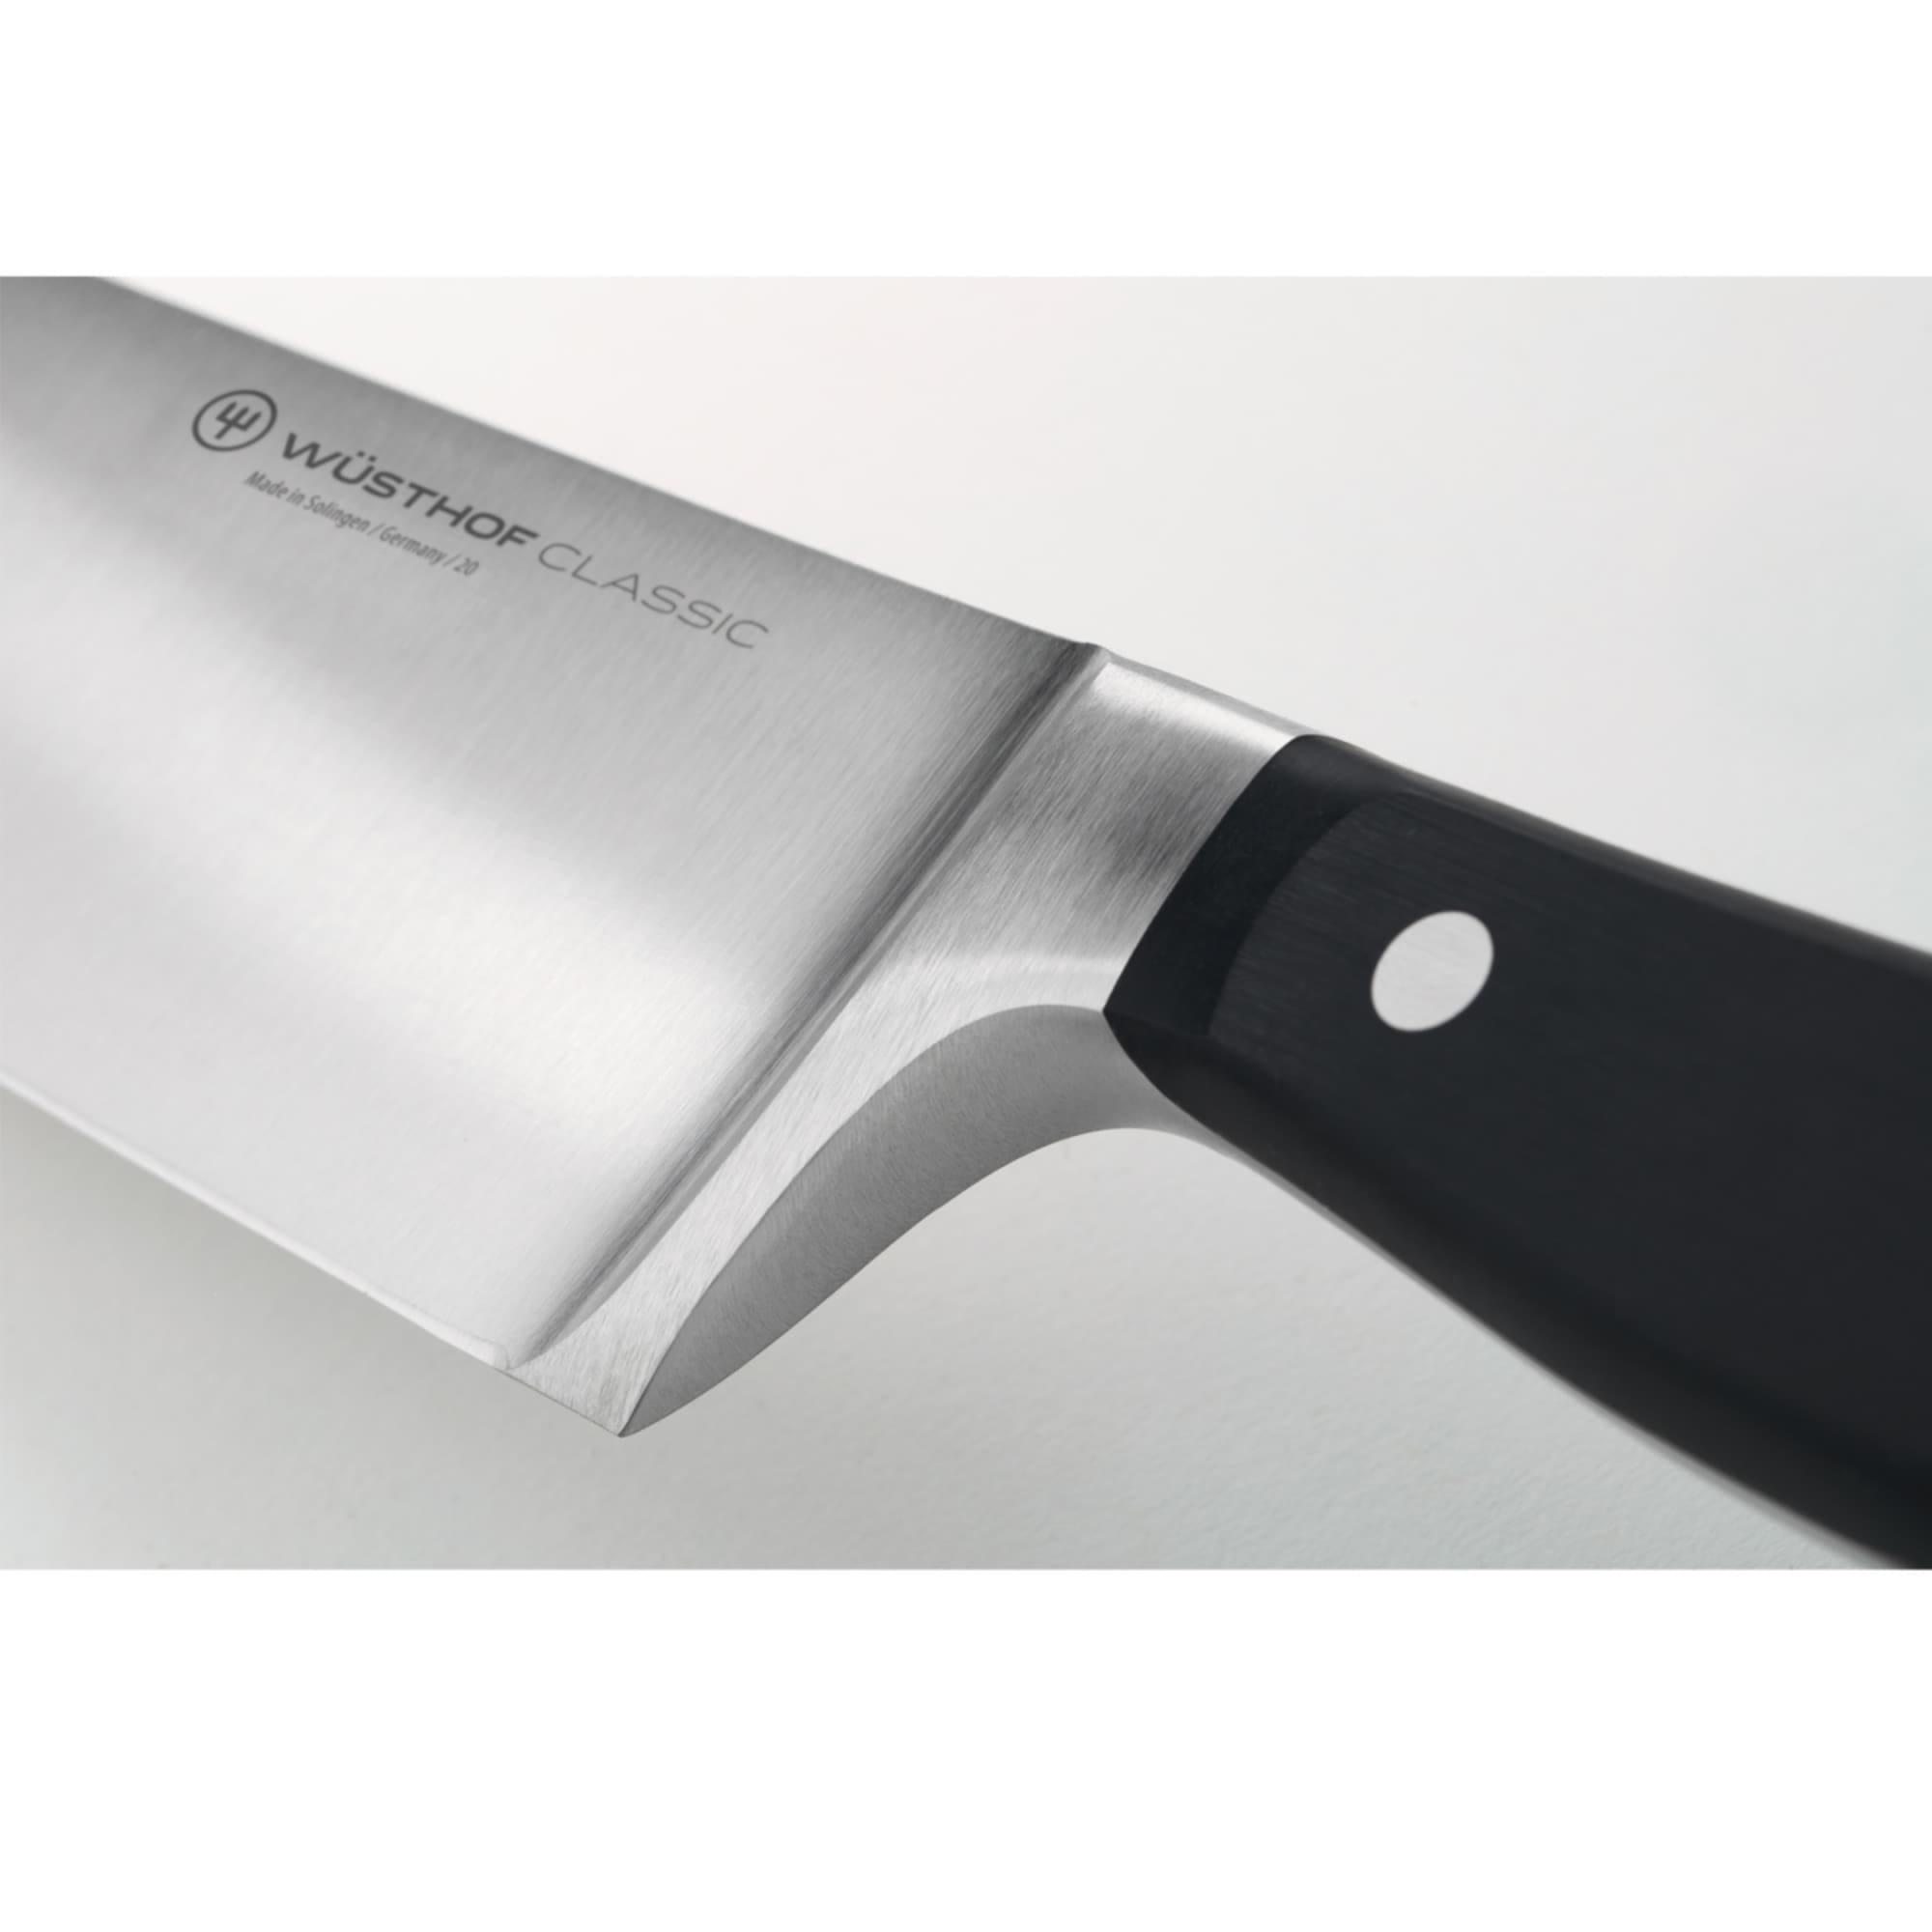 Wusthof Classic Cook's Knife 20cm Image 4